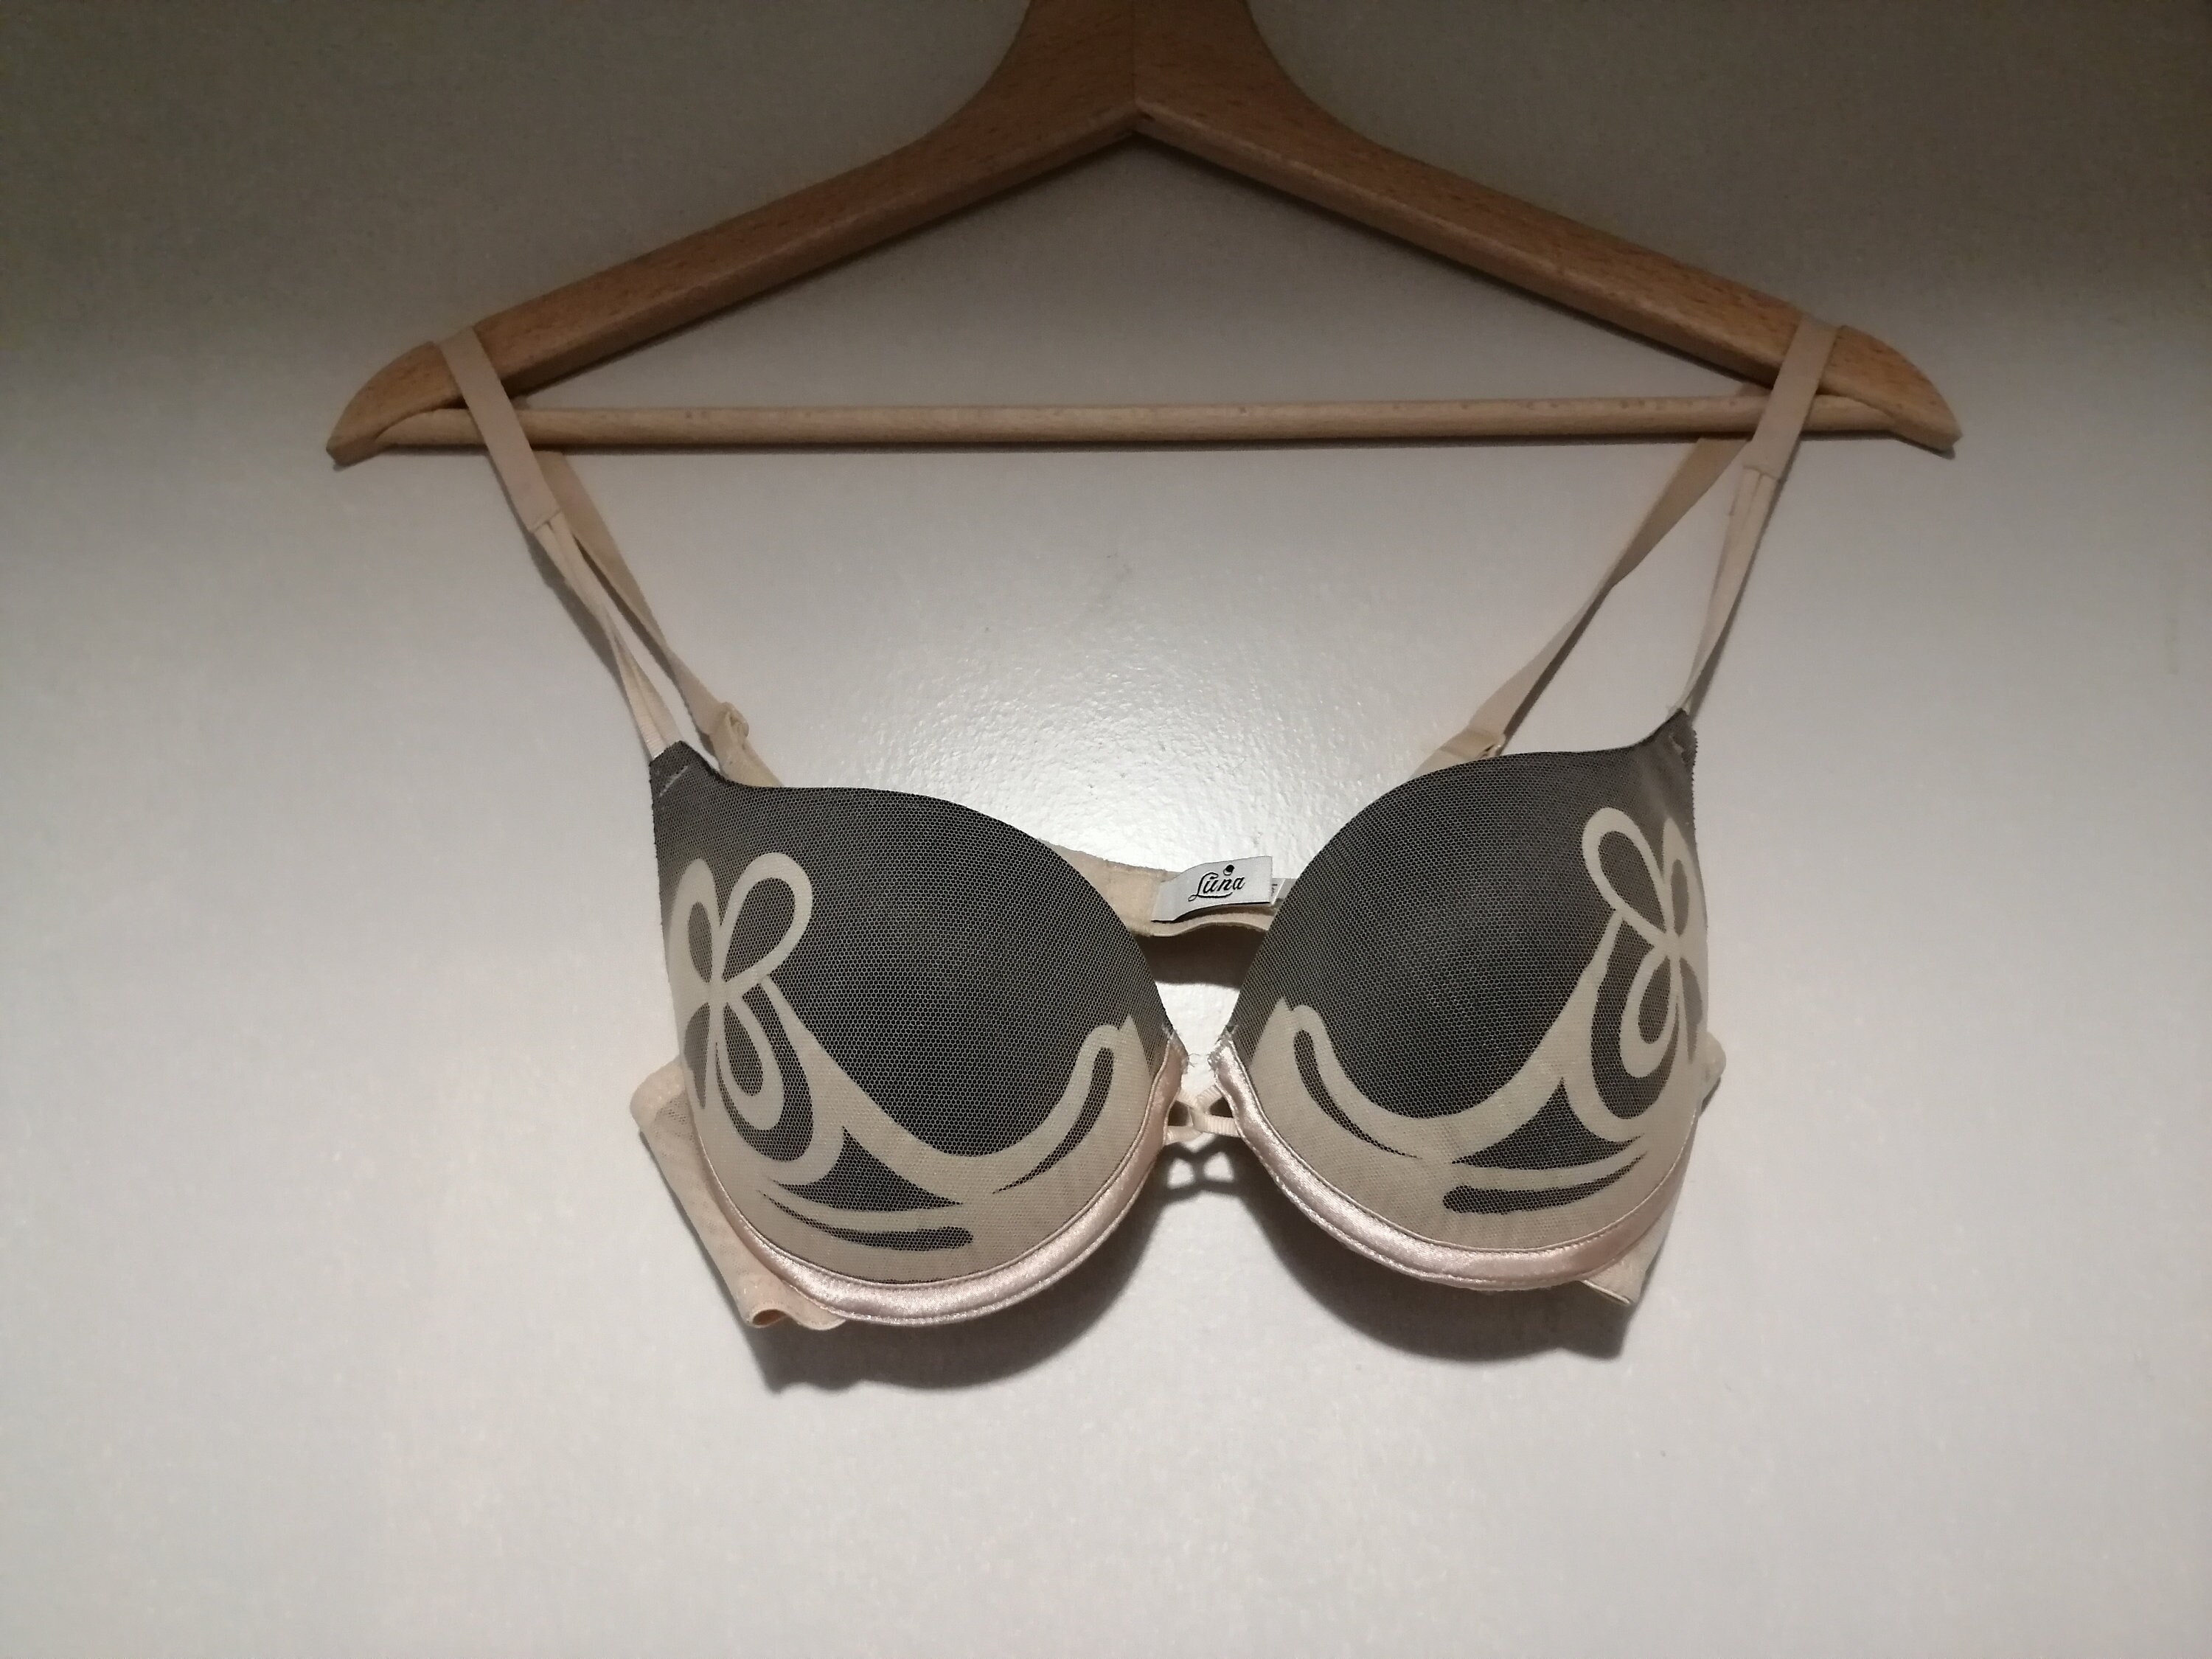 Vintage 1990's Bra by Luna Made in Italy Padded Cream Mesh Size UK 32b/fr85/eu70  Used 